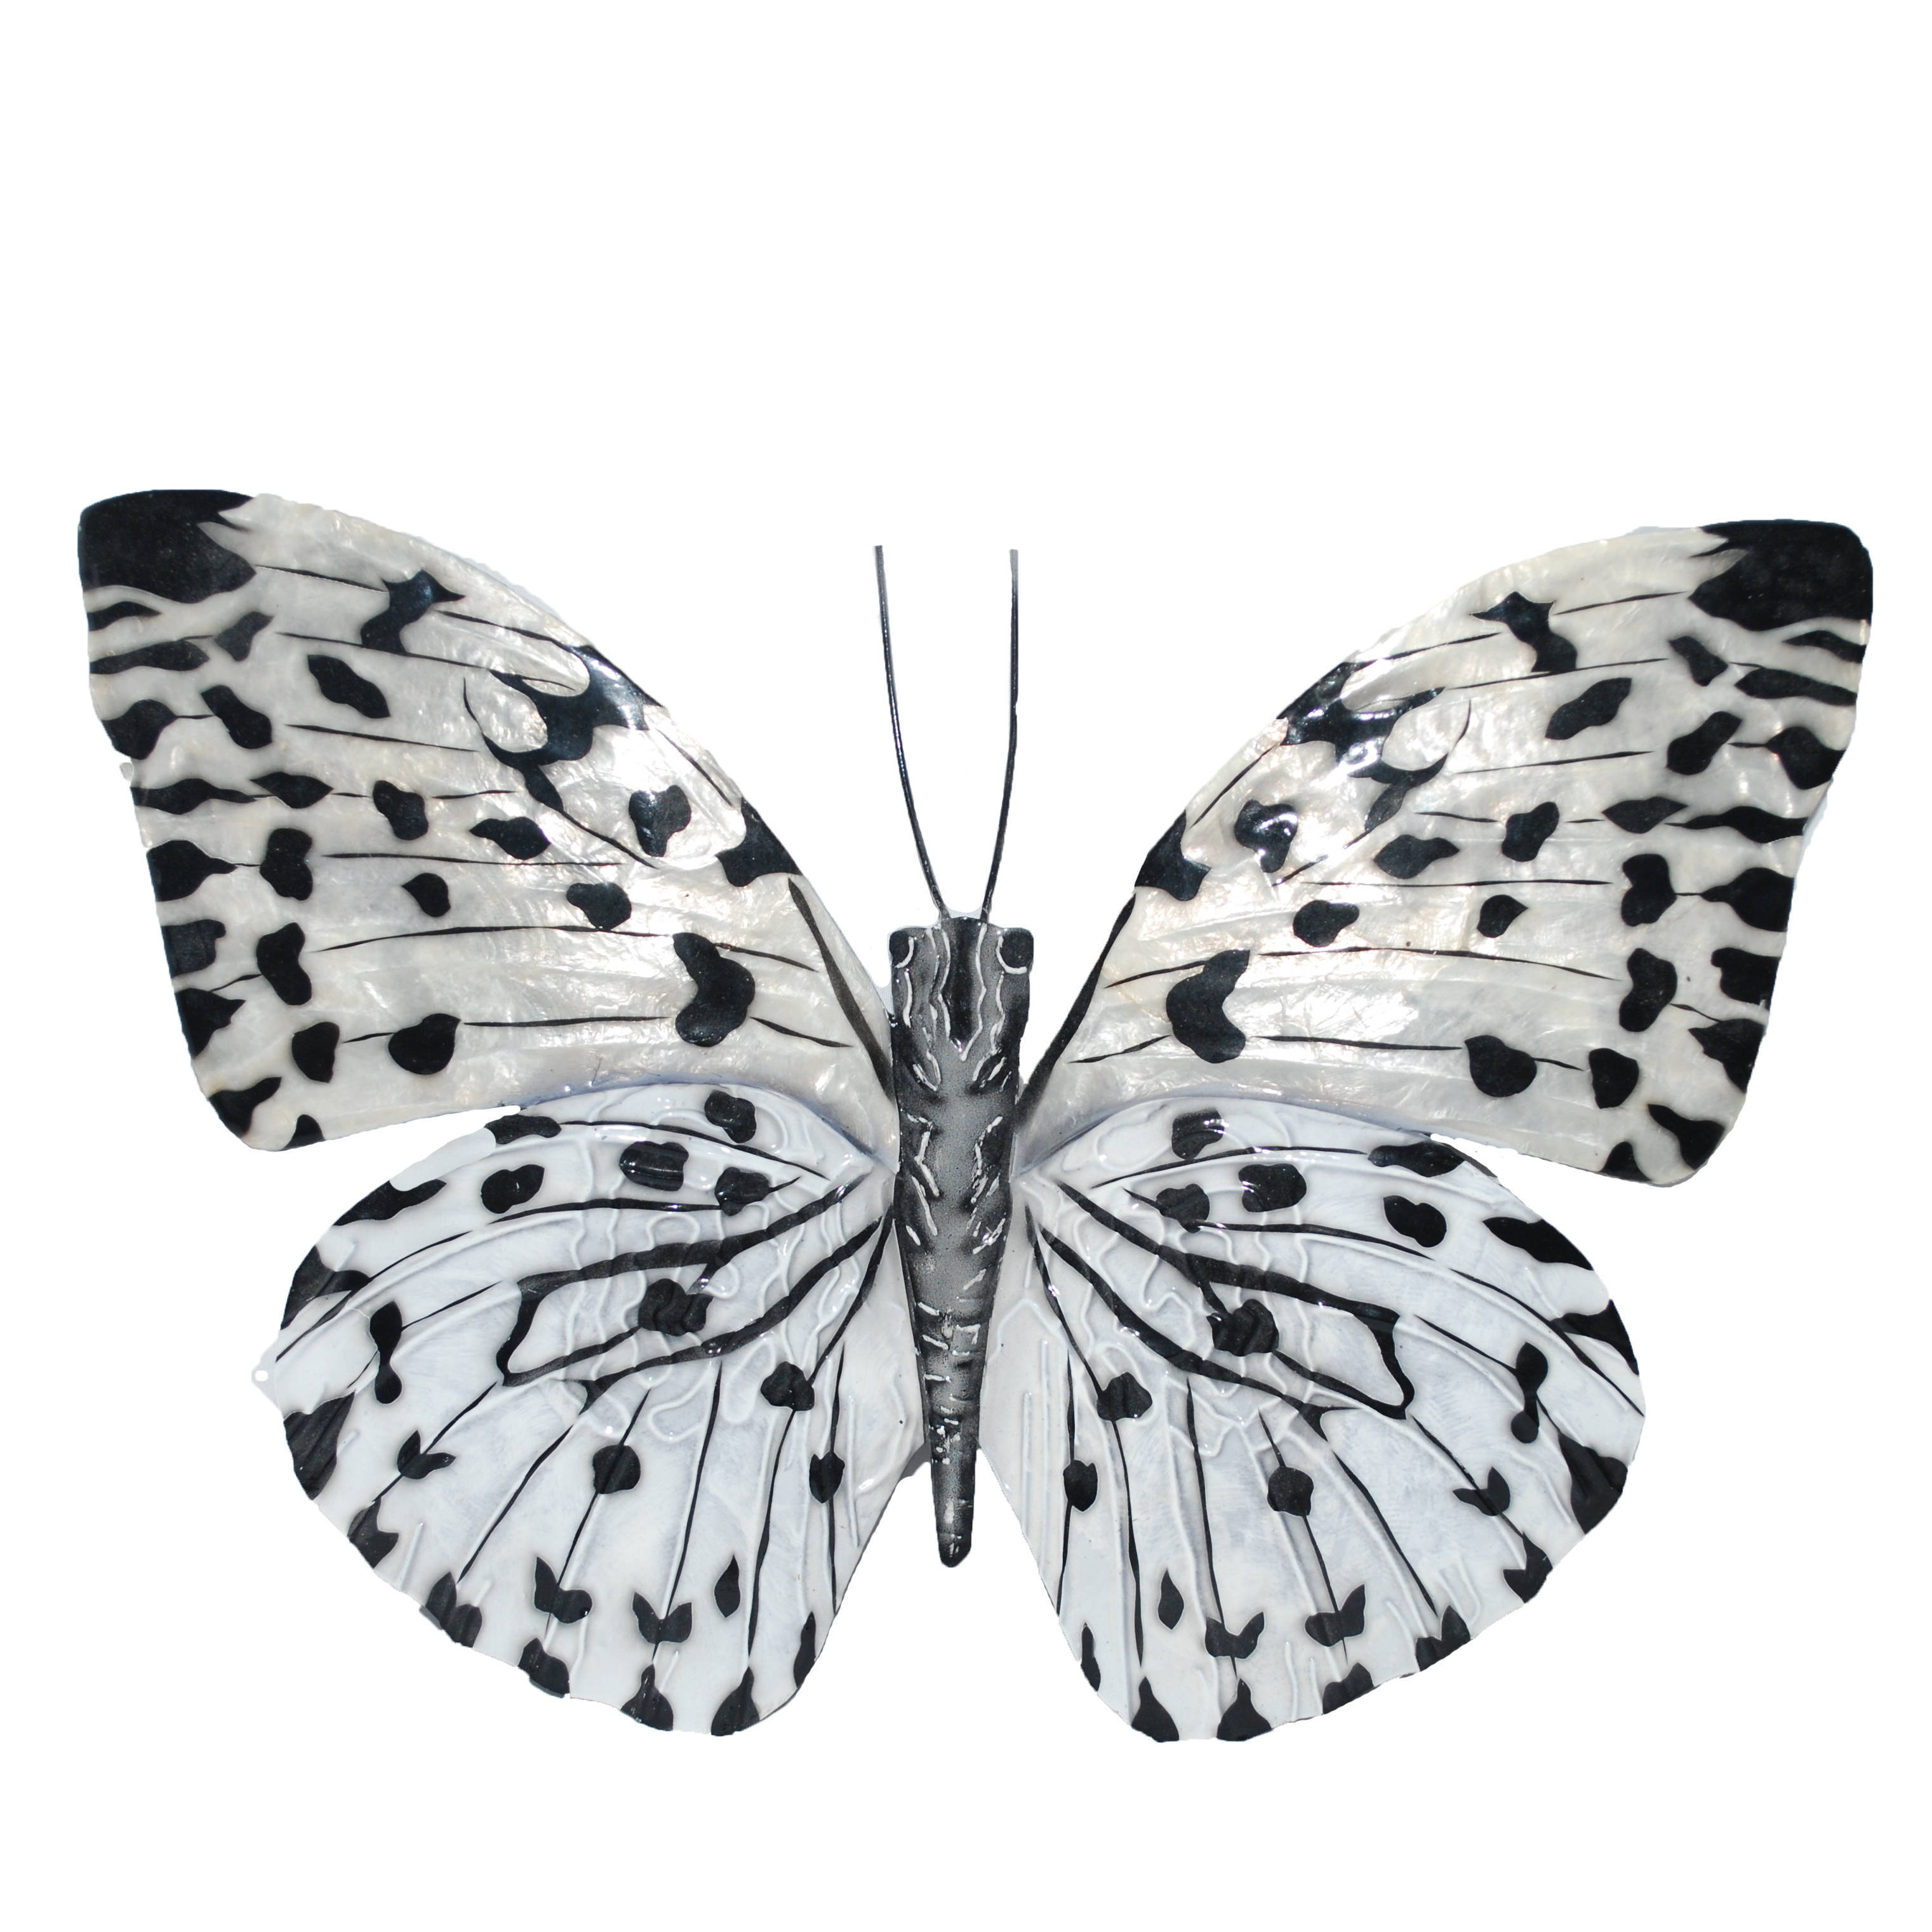 Goodinfo: Black And White Butterfly Images